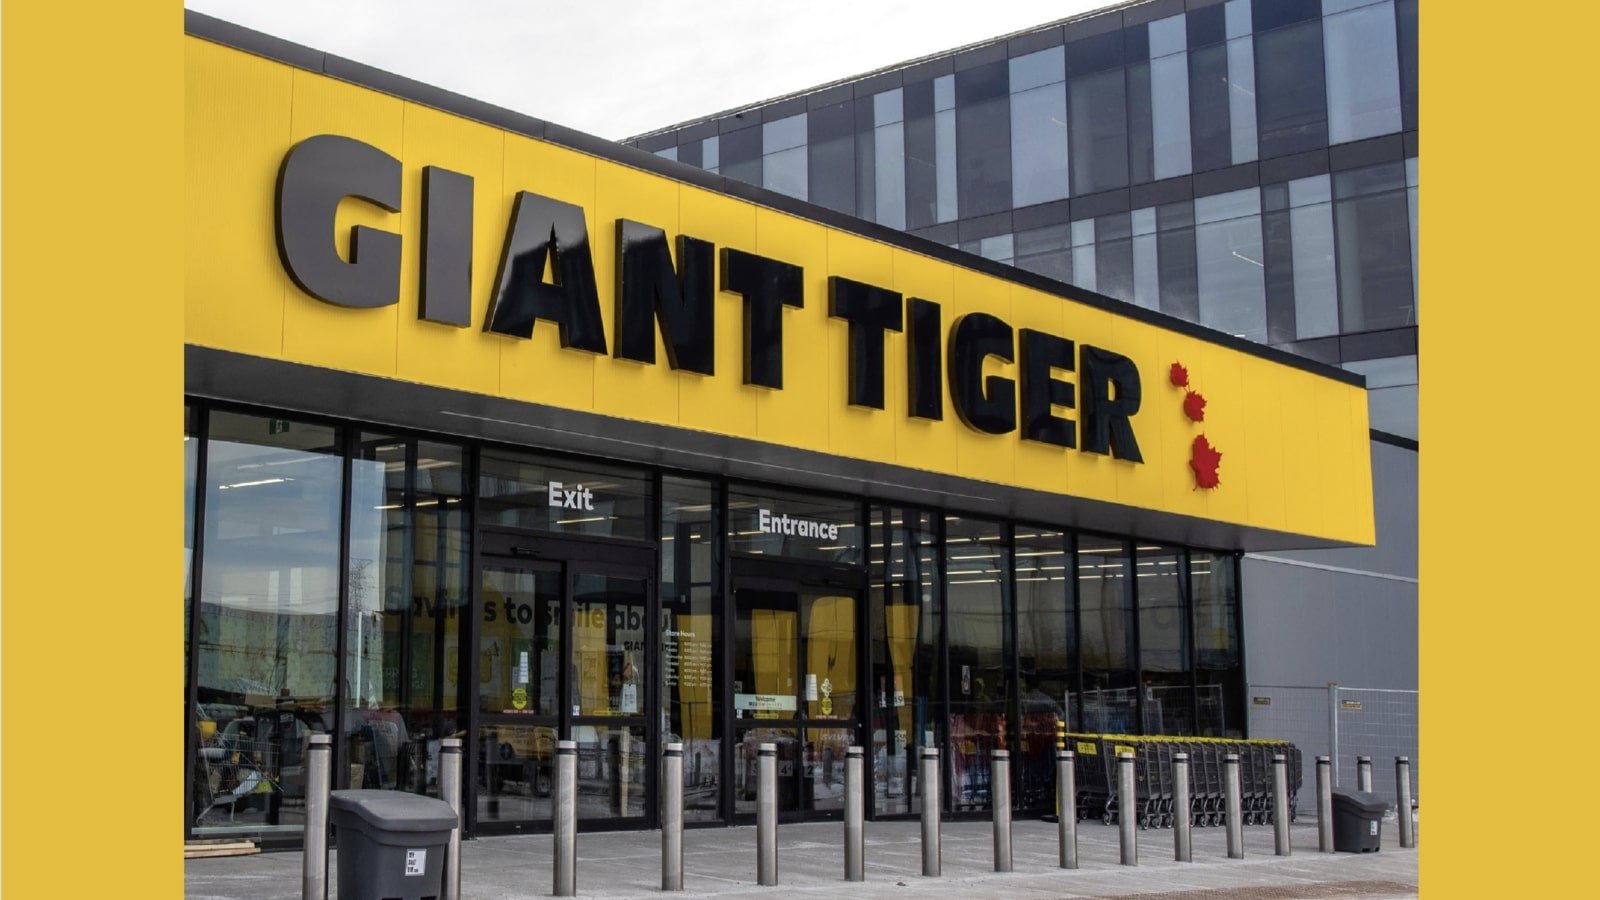 Giant Tiger Data Breach Exposes 2.8M Customer Records